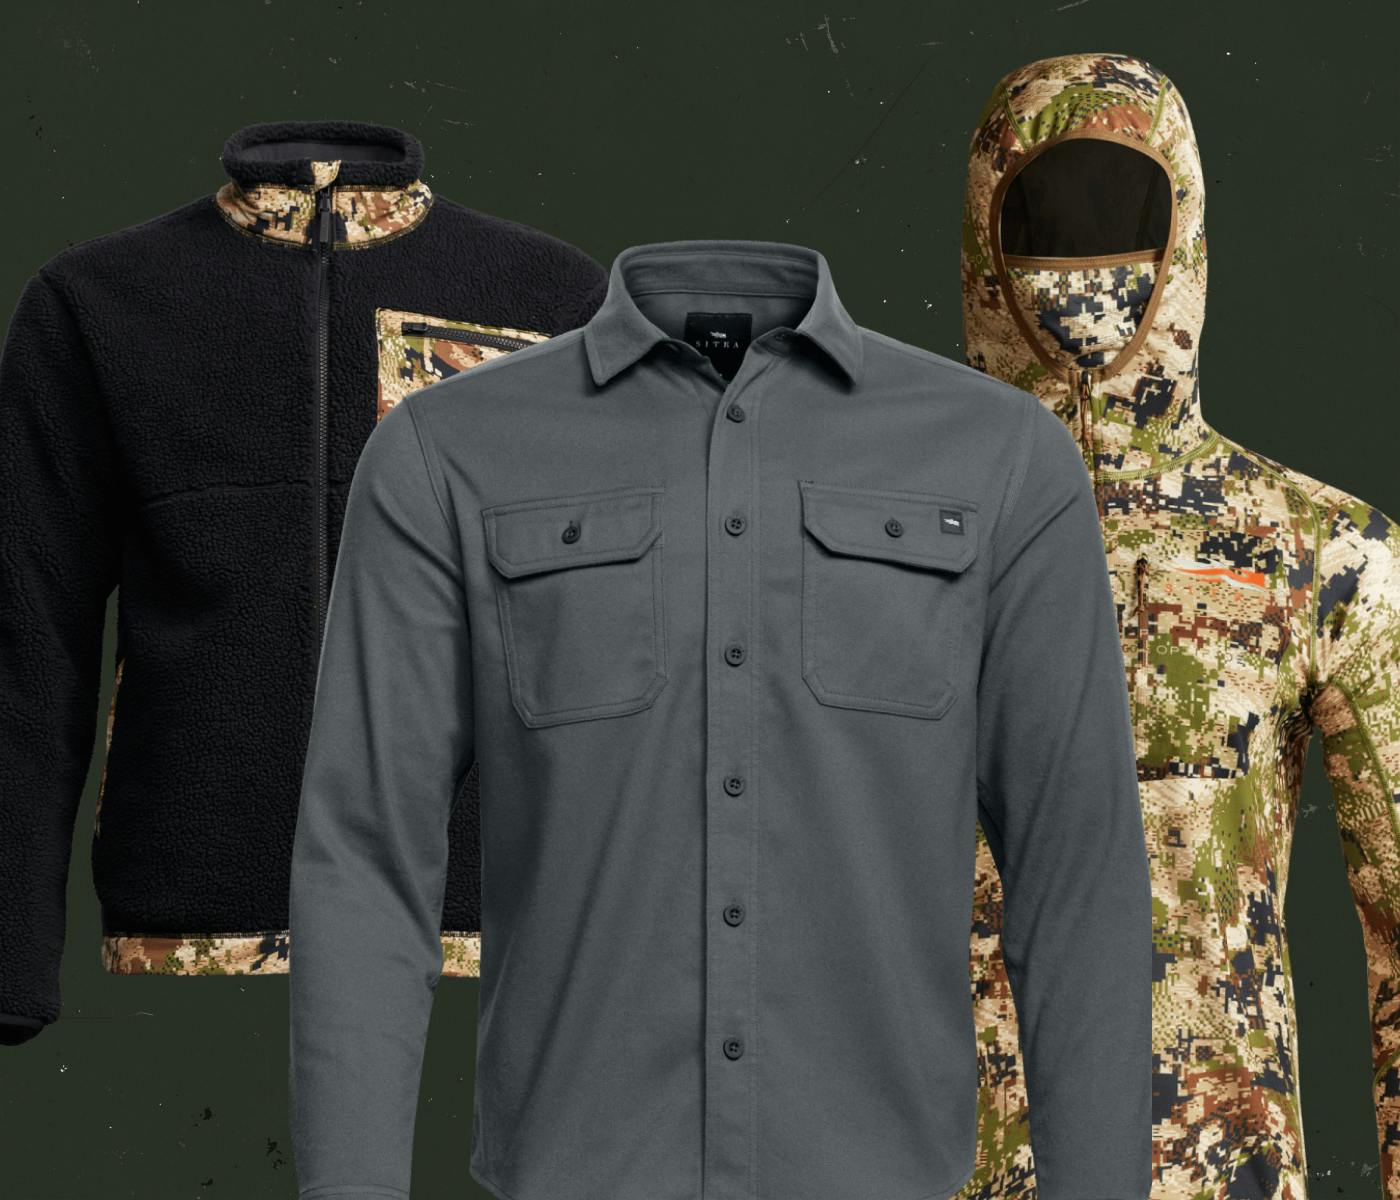 Holiday Gift Guide - Gifts for Men | SITKA Gear